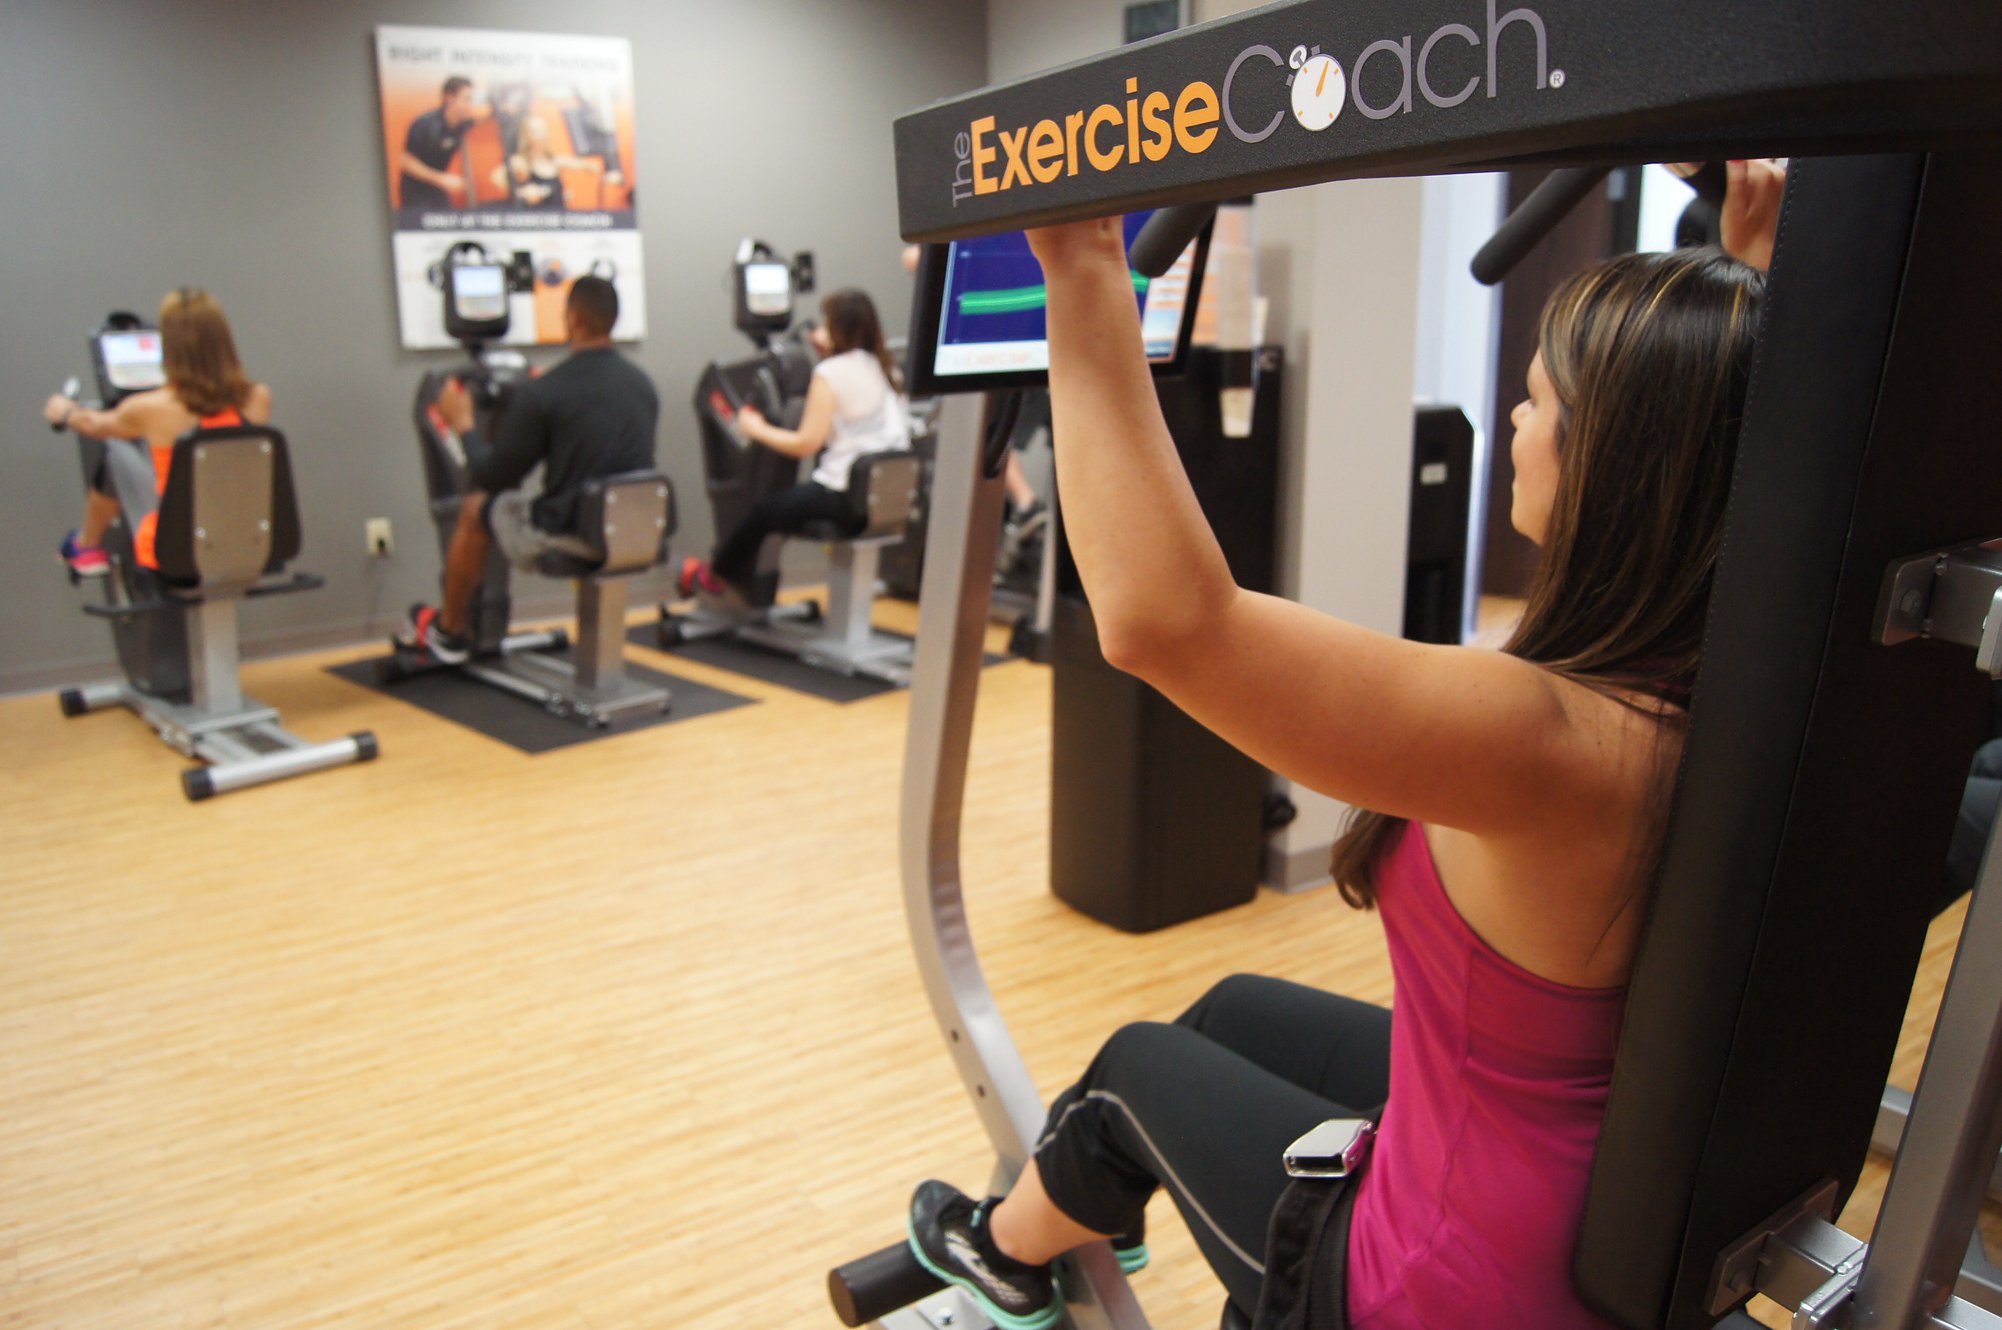 The Exercise Coach program calls for two twenty-minute workouts per week. Each machine that a customer uses has a computer that tracks each session. The sessions are led by a personal trainer. (Submitted)